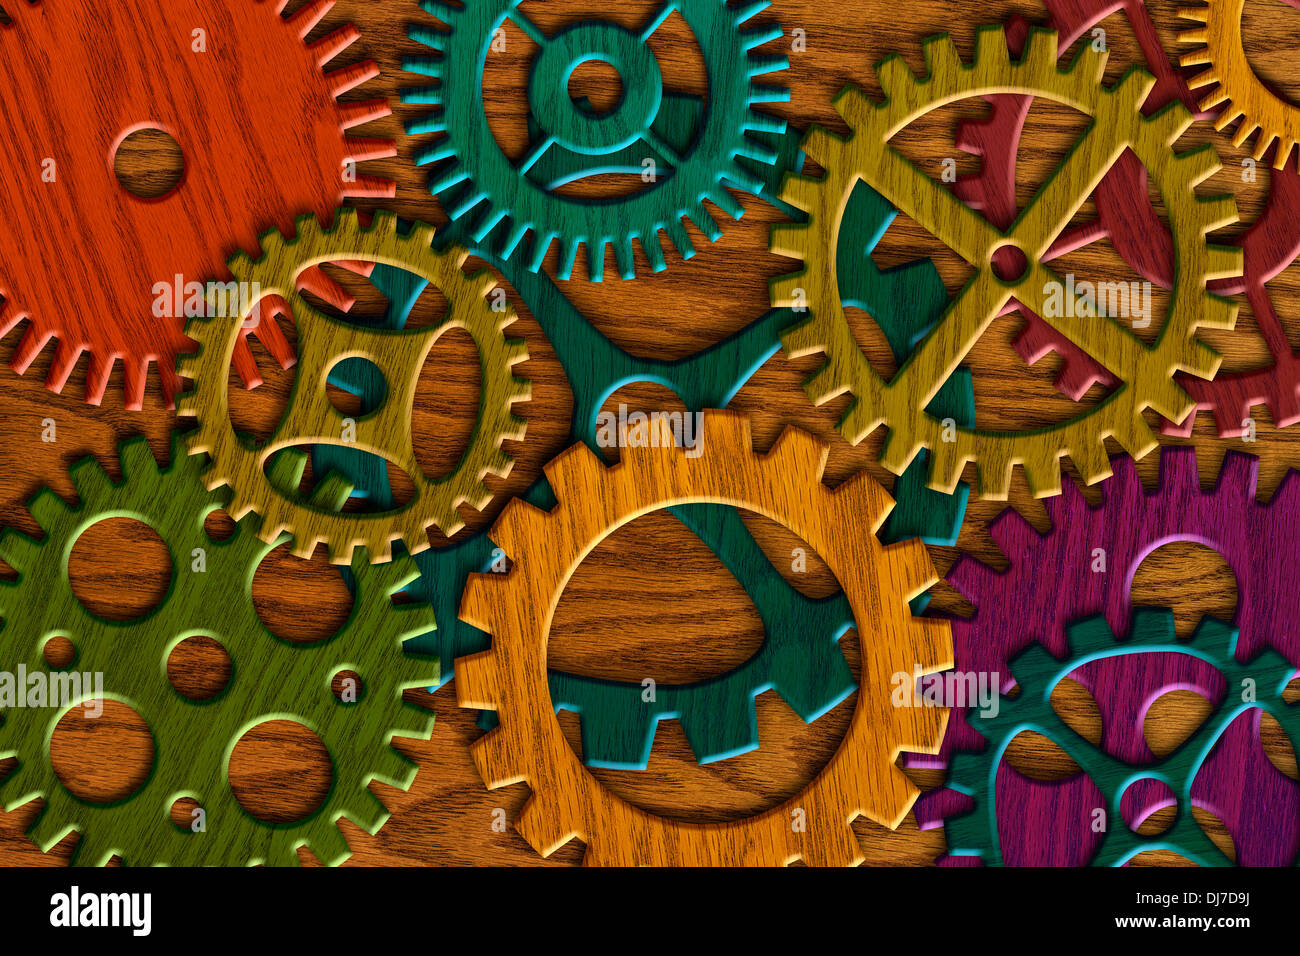 Colorful Wooden Gears on Wood Grain Texture Background Stock Photo